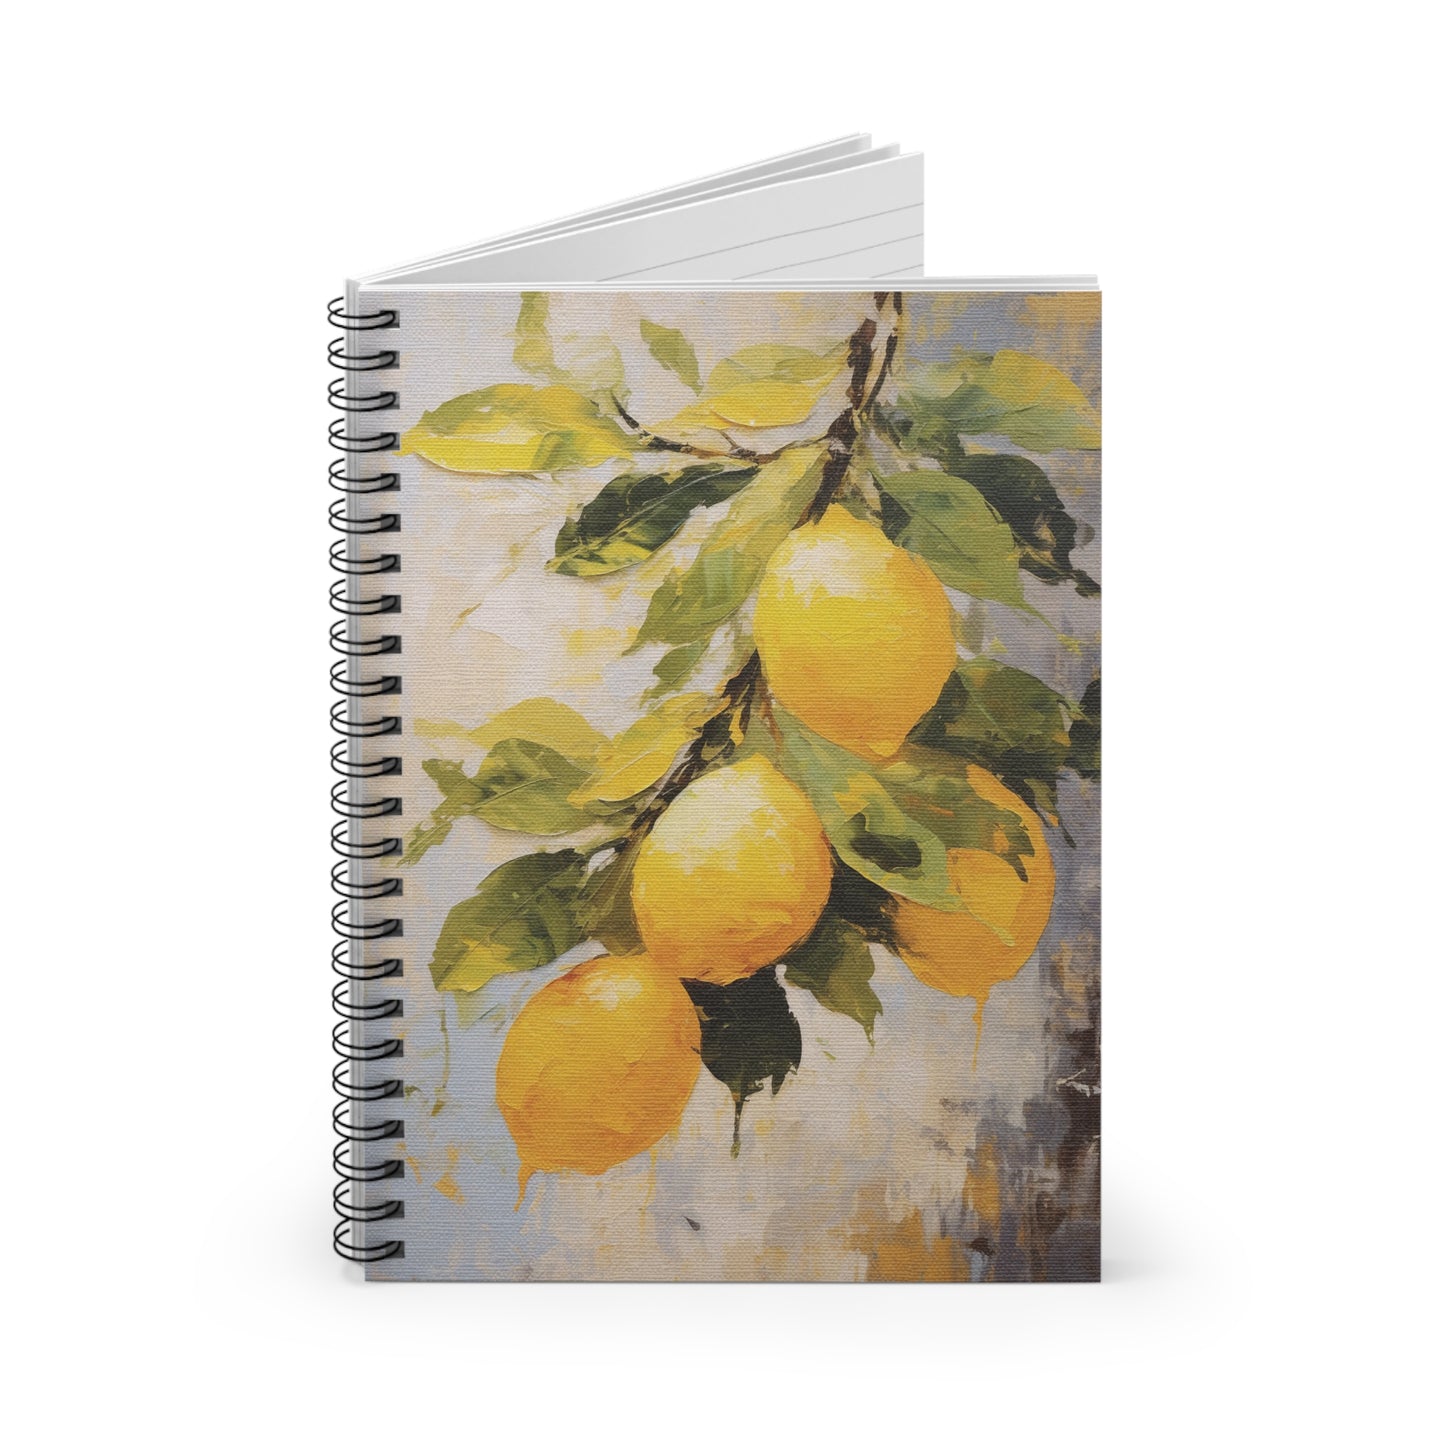 Lemon Art Print Notebook (5) - Composition Notebook, Spiral Notebook, Journal for Writing and Note-Taking